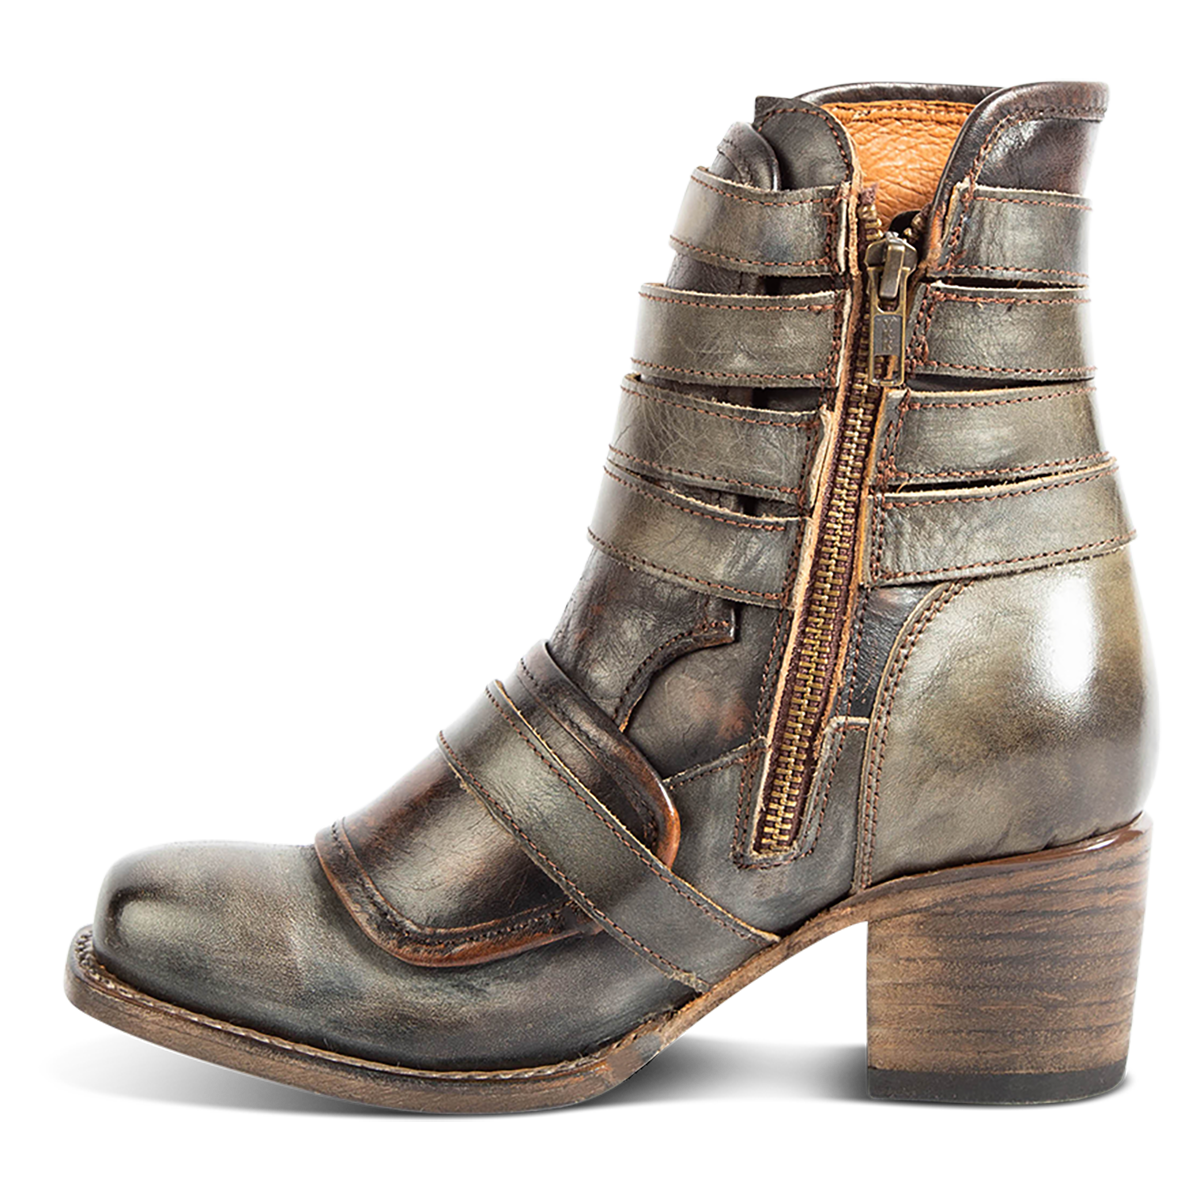 Inside view showing FREEBIRD women's Darlin olive leather bootie with leather straps, inside zip closure and square toe